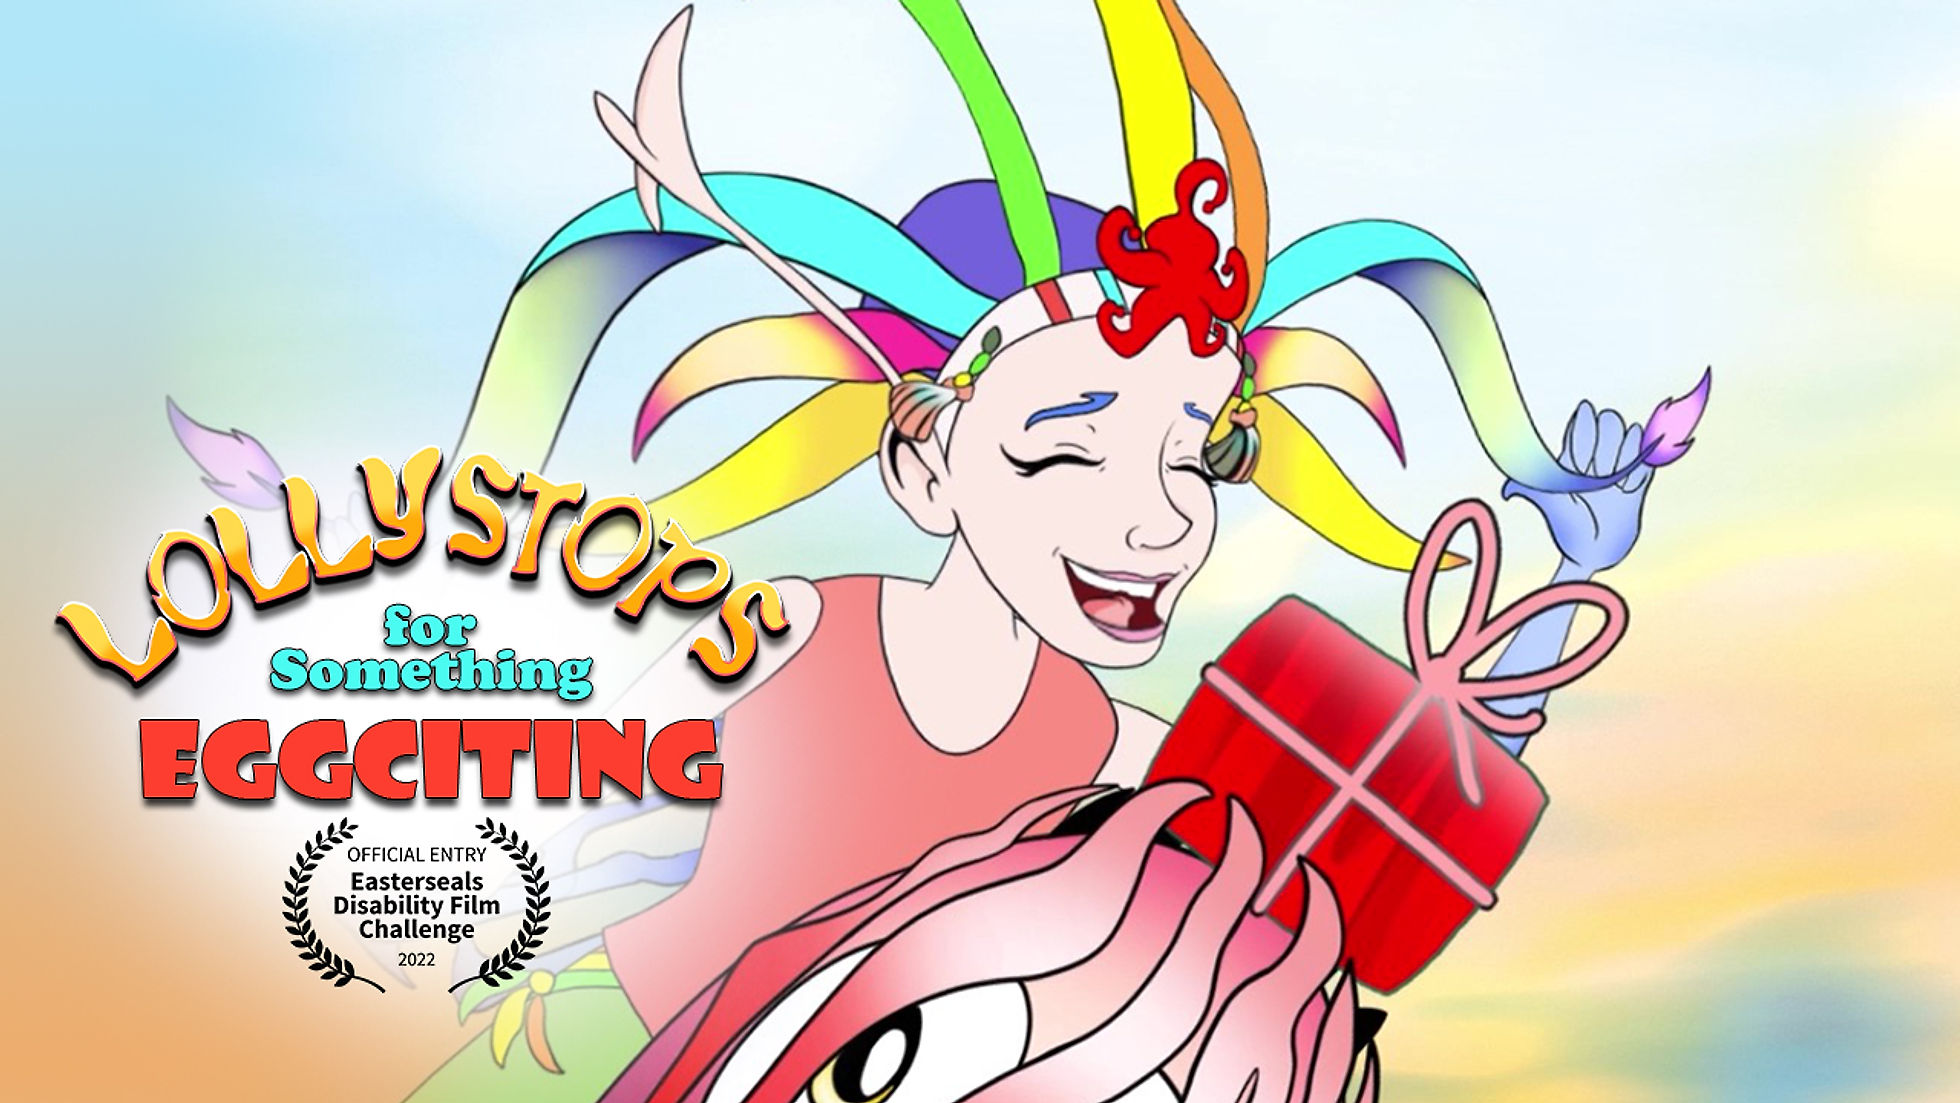 LOLLYSTOPS for Something EGGciting - Movie Special Edition